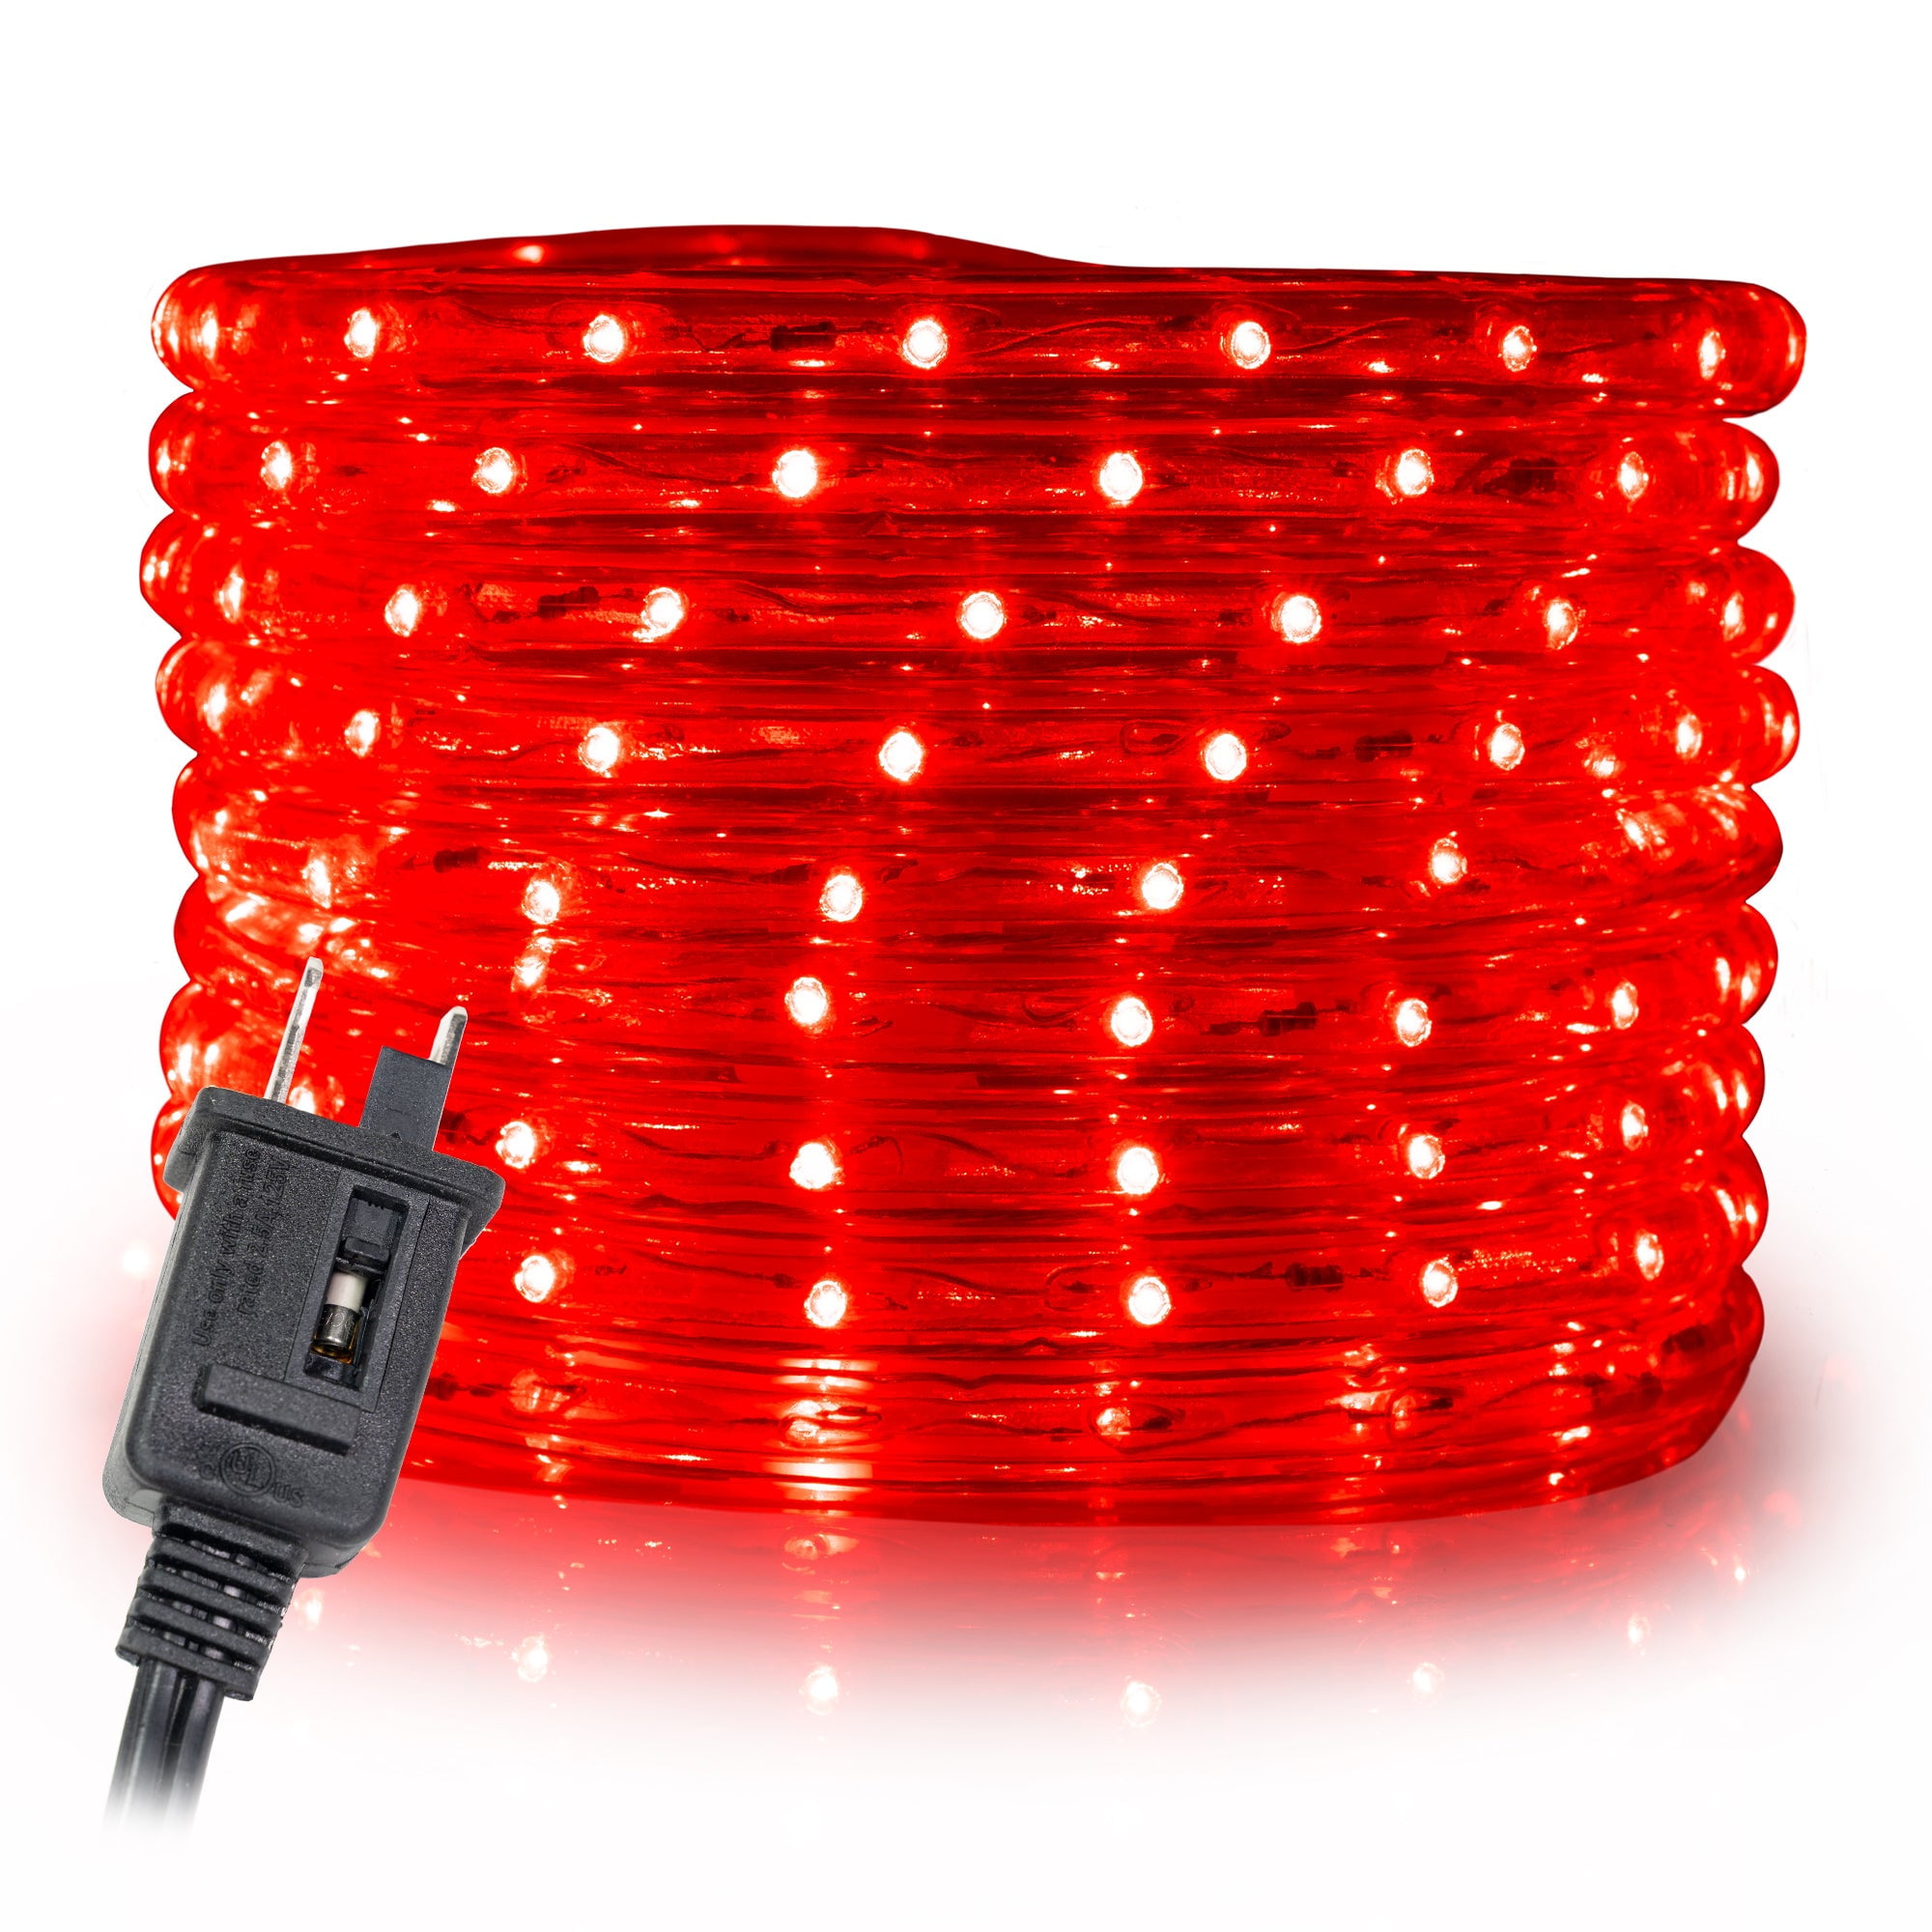 10' 20' 25' 50' 100' 150ft Connectable 3/8" LED Rope Light Waterproof Decoration 